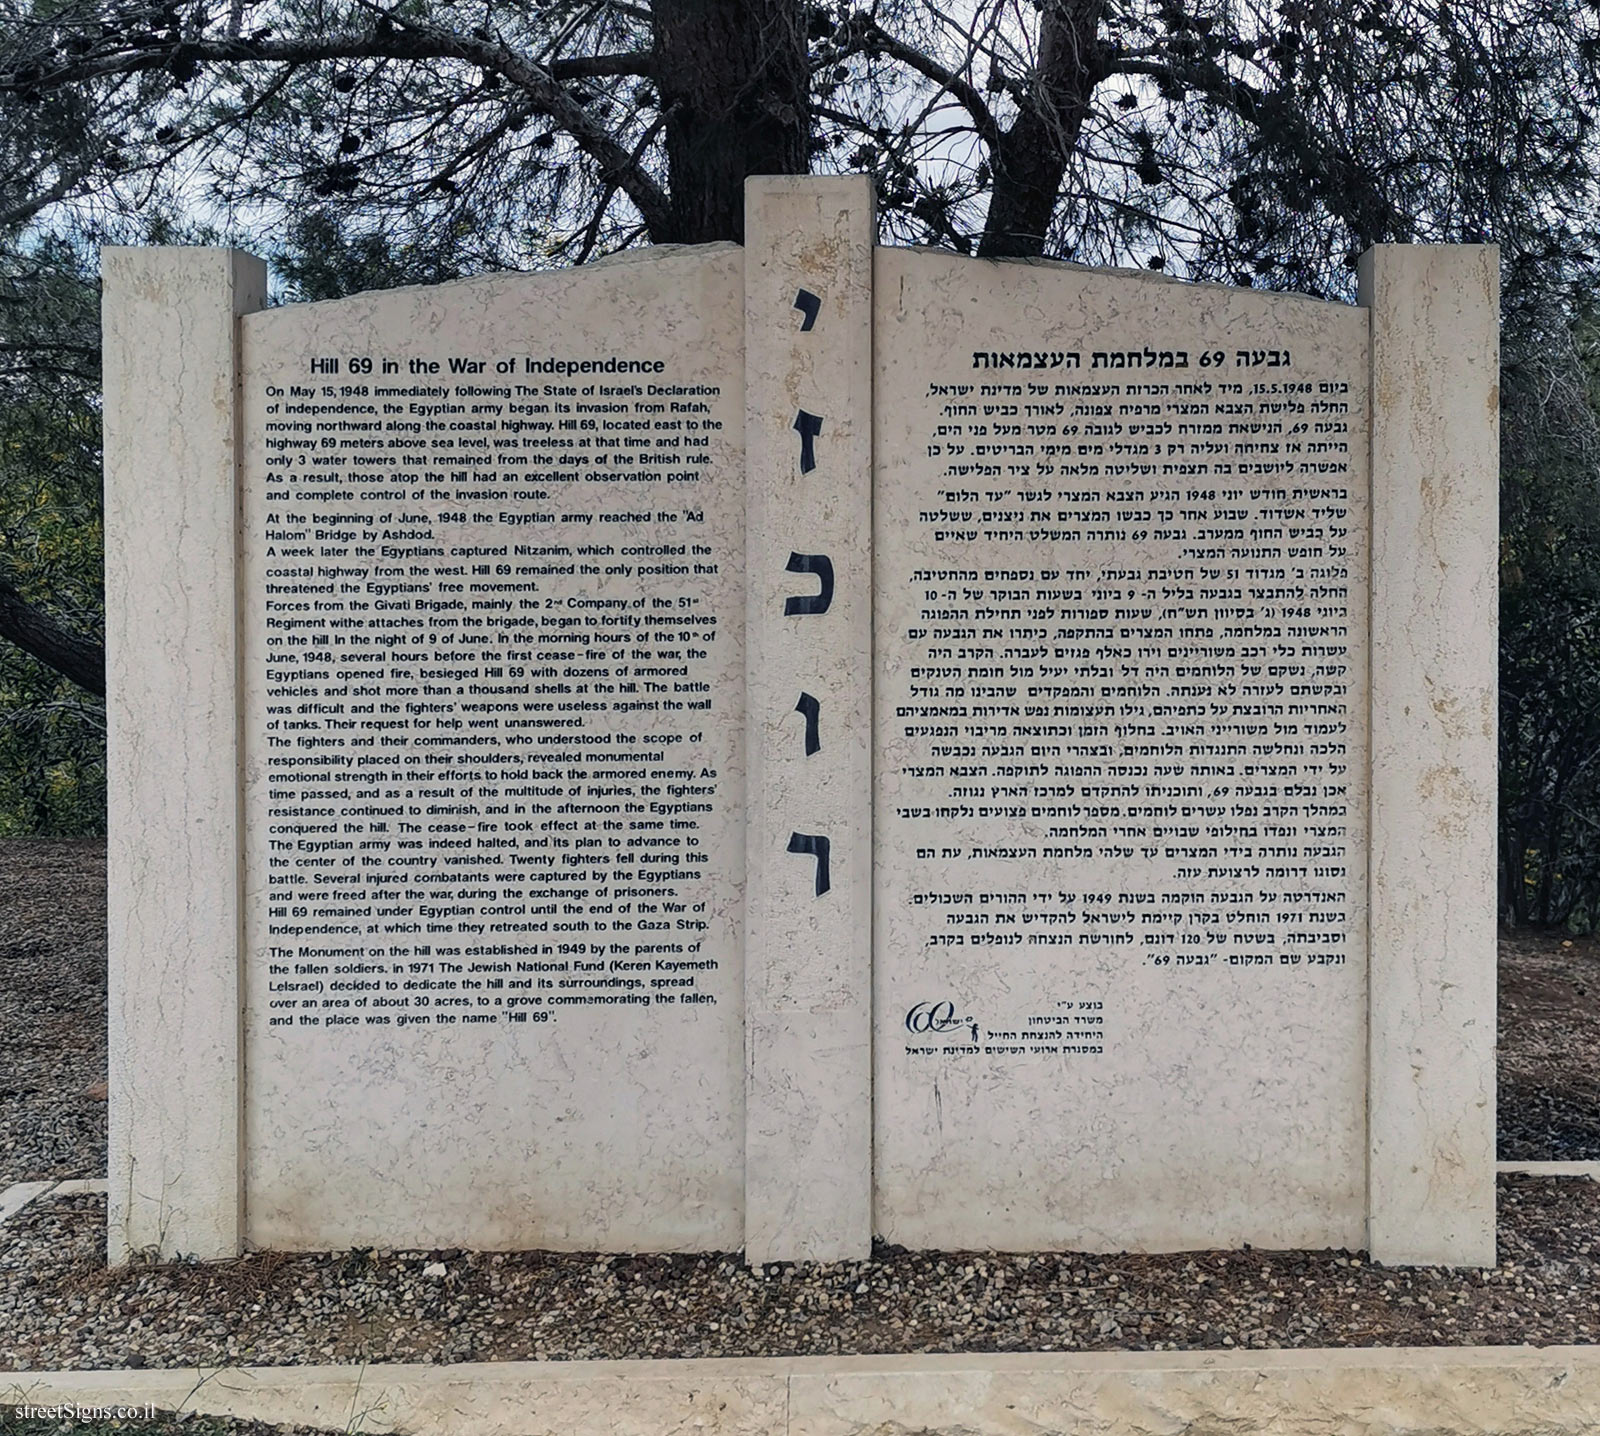 A memorial monument on the hill 69